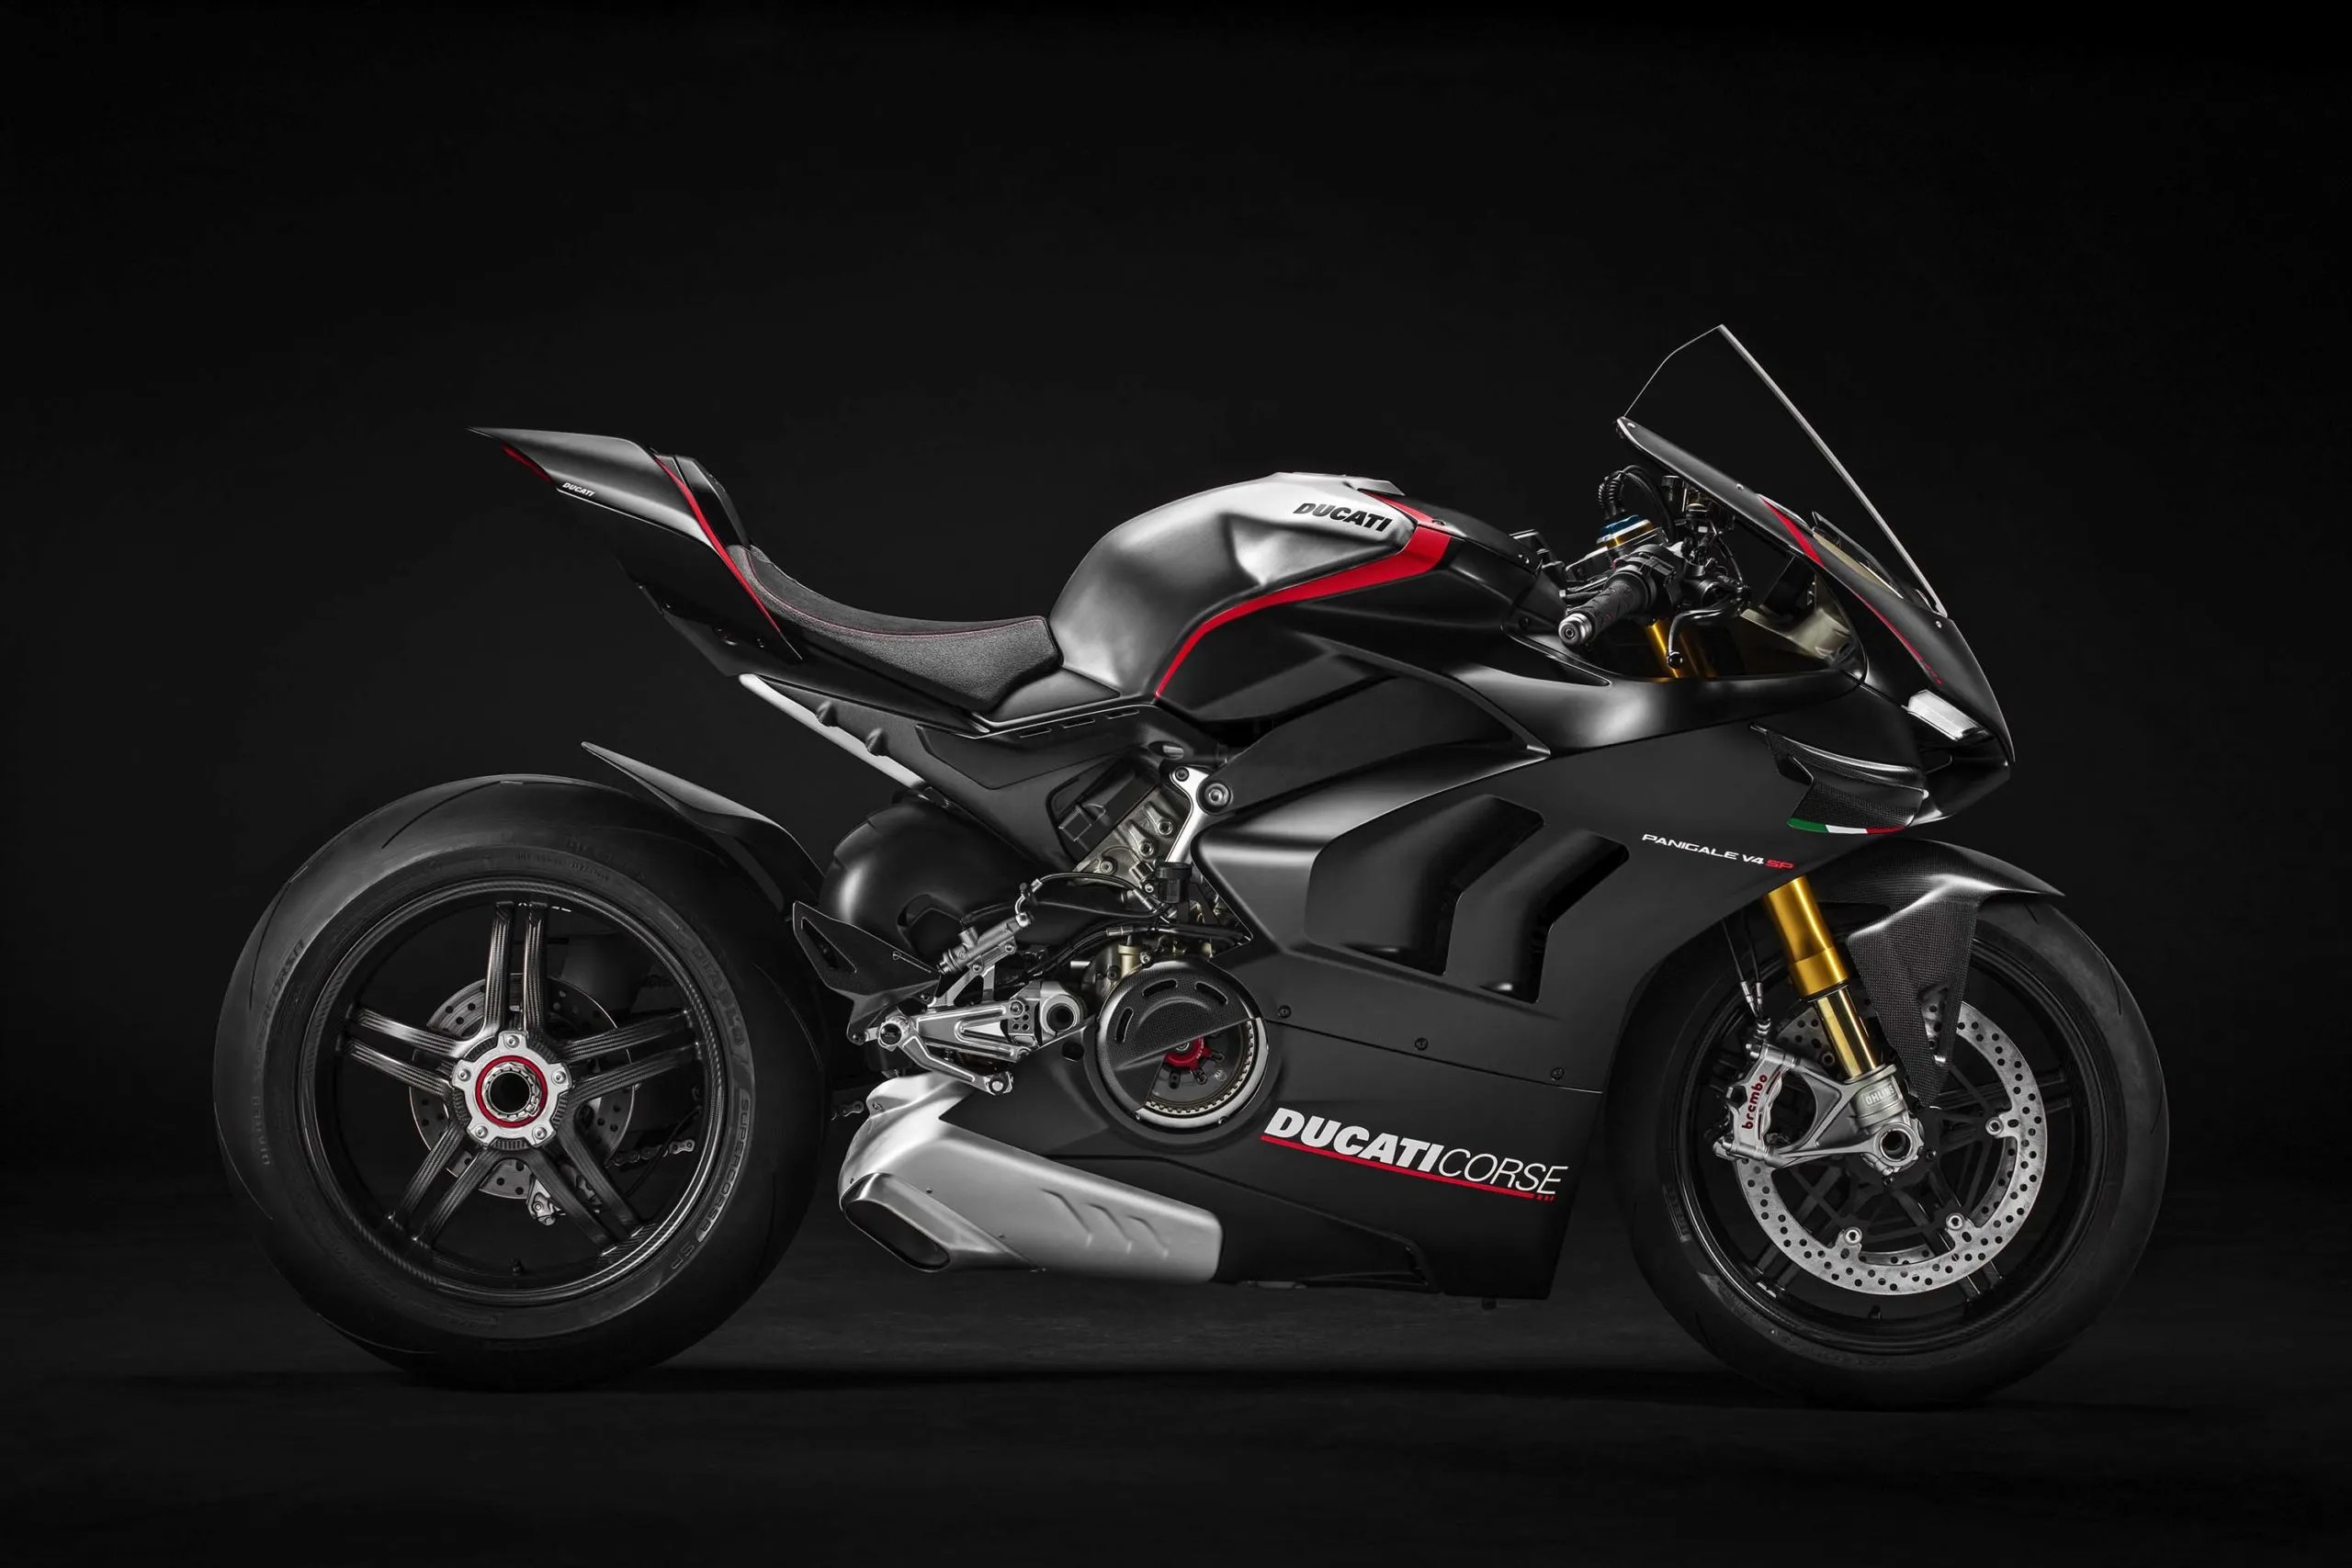 The Ducati Panigale V4 SP Just Ruined Your Christmas List & Rubber